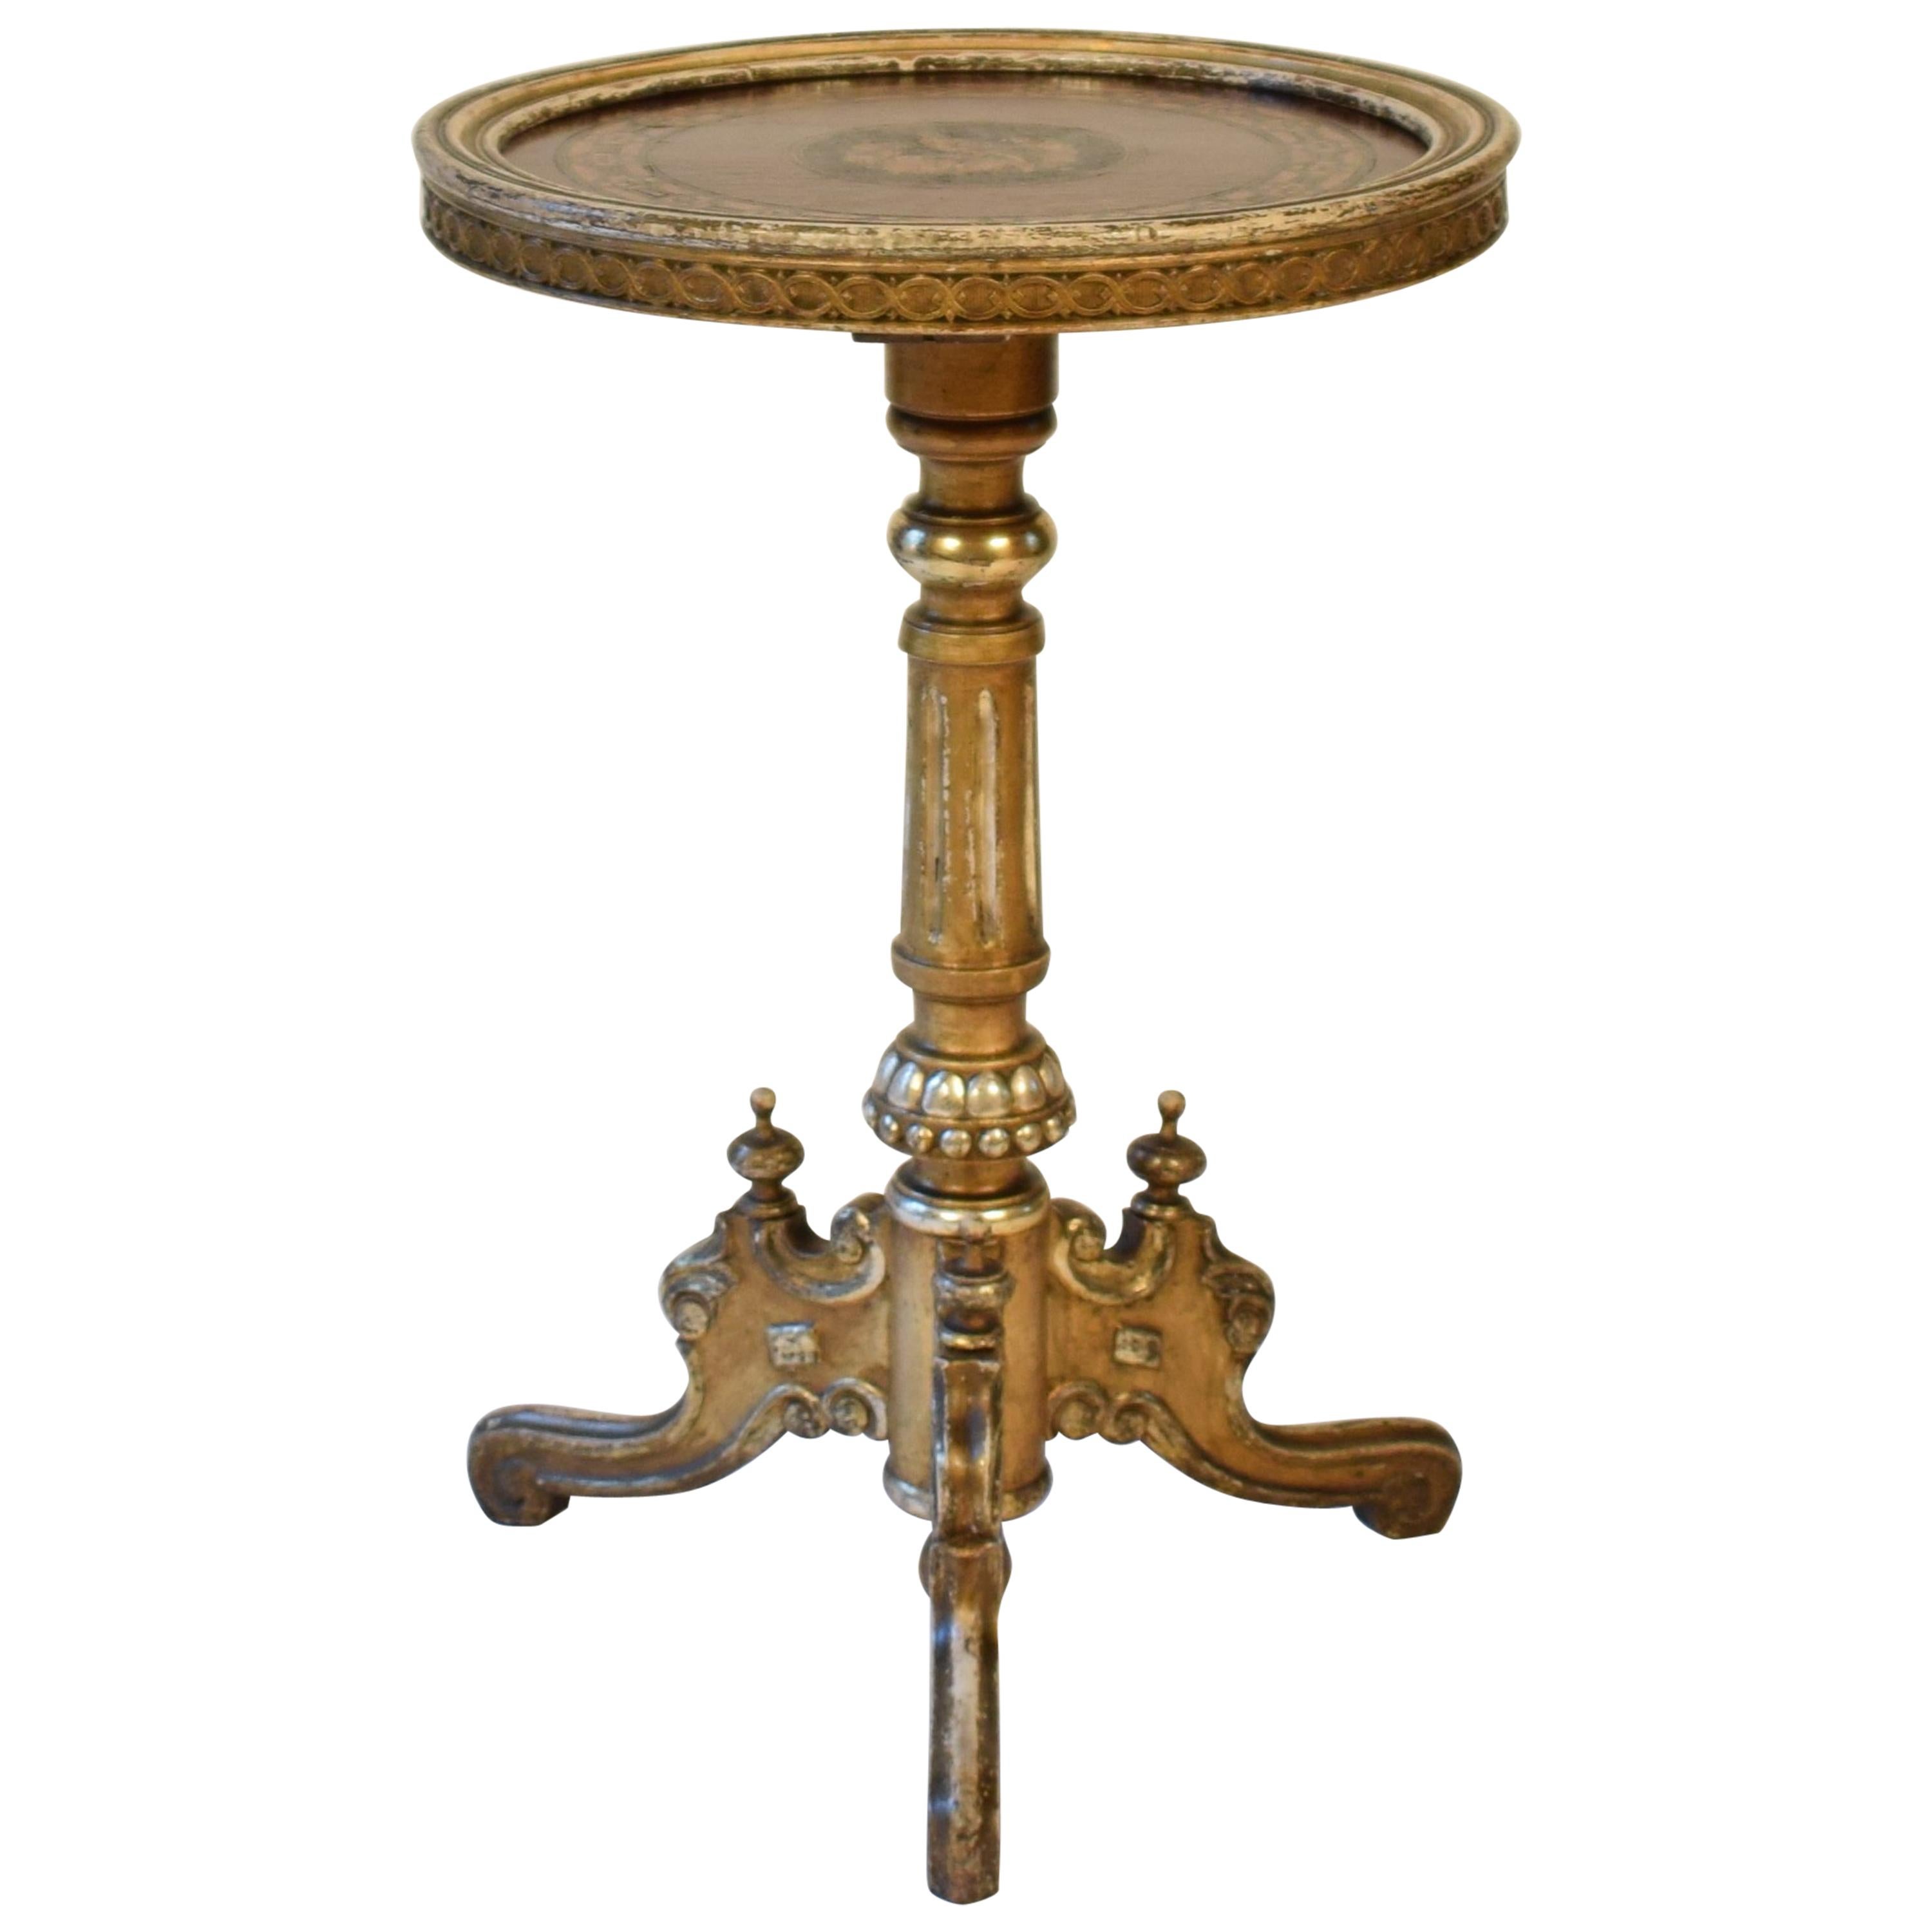 Victorian Gilded and Marquetry Round and Turned Side Table, circa 1870